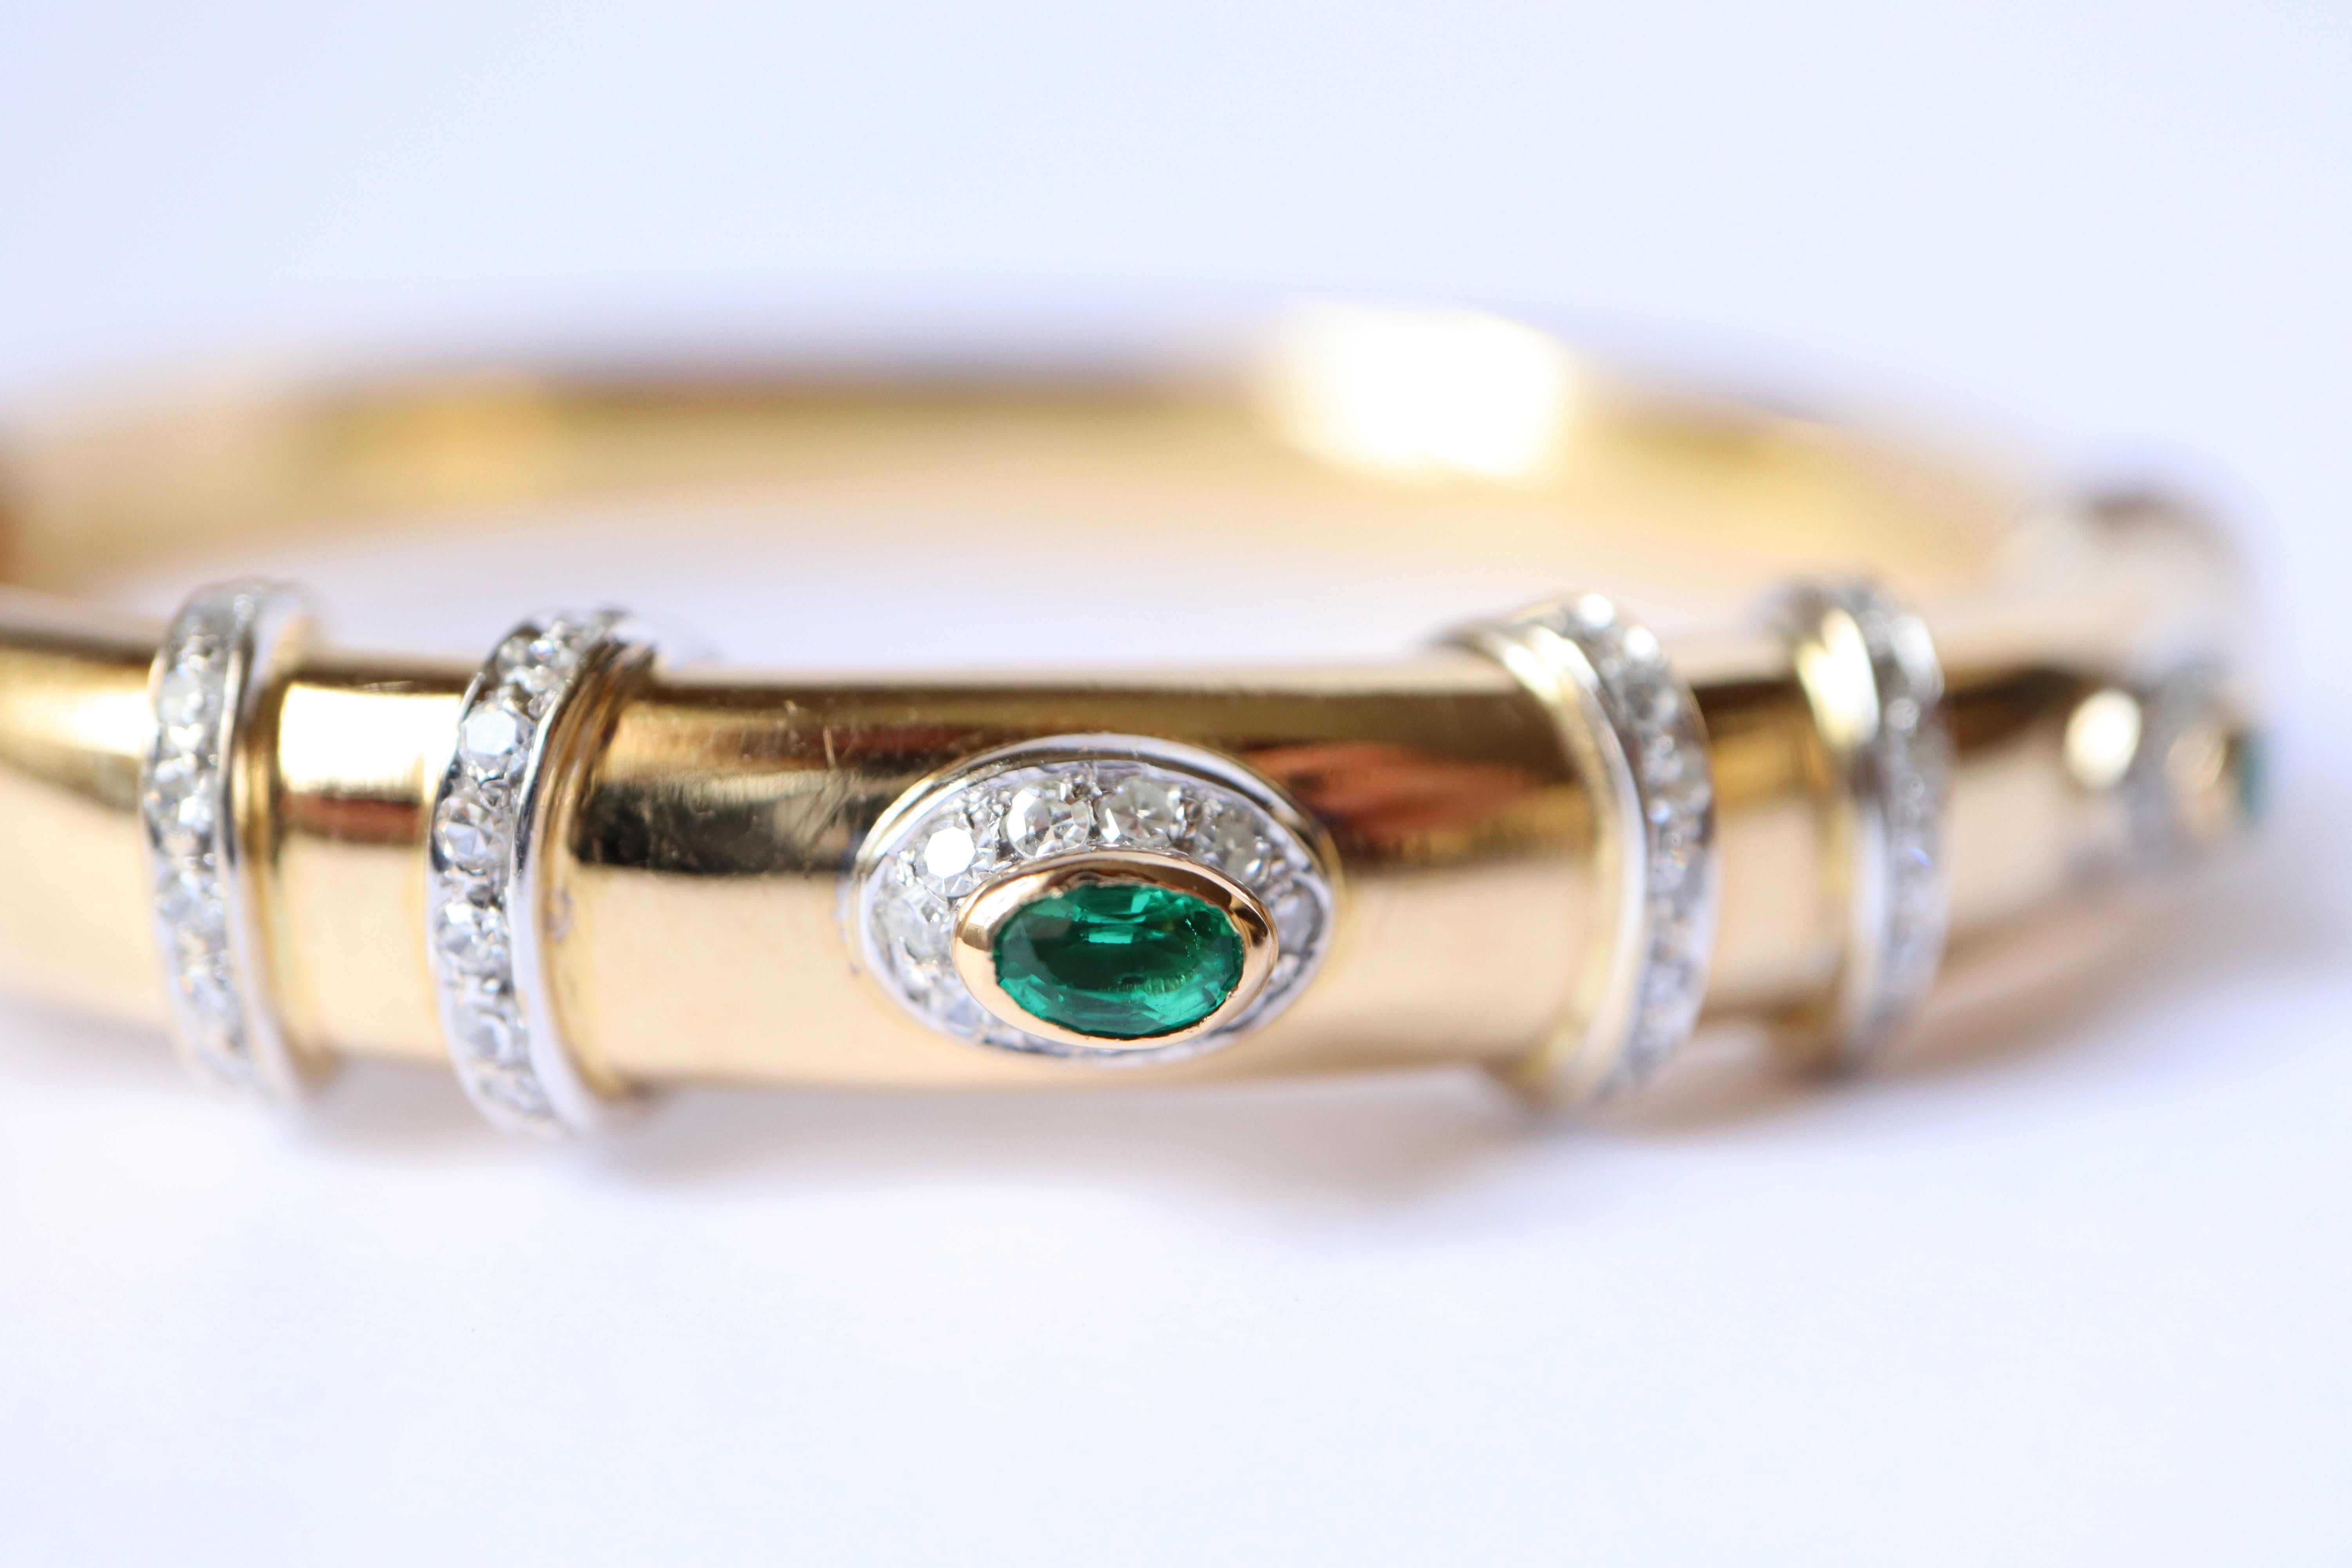 Cartier Rigid Emerald Bracelet 1960 in Yellow and White Gold 18 kt and Diamonds 8